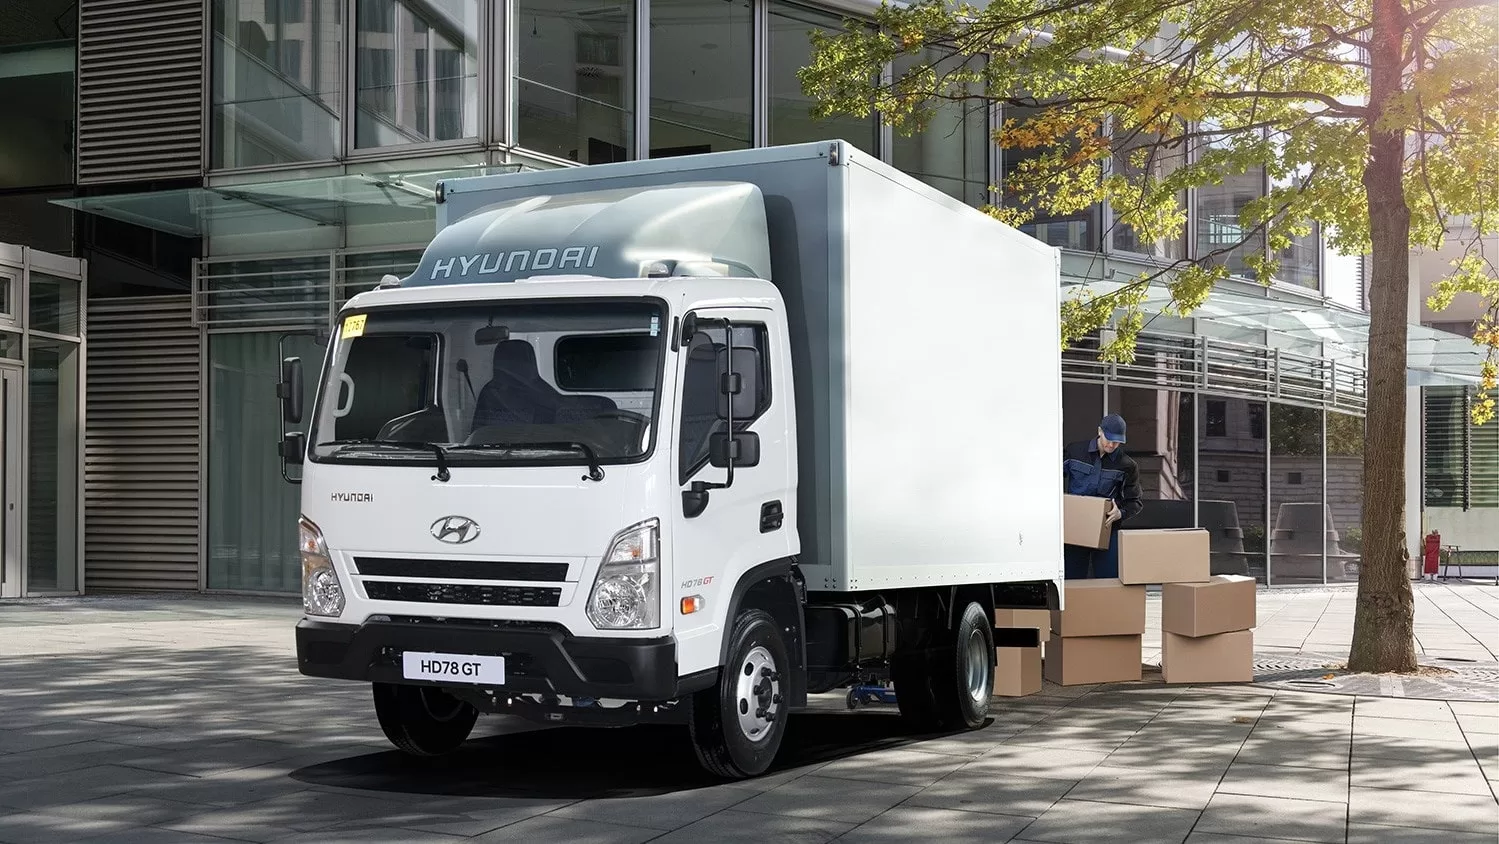 Hyundai HD78 GT makes moving your business easy